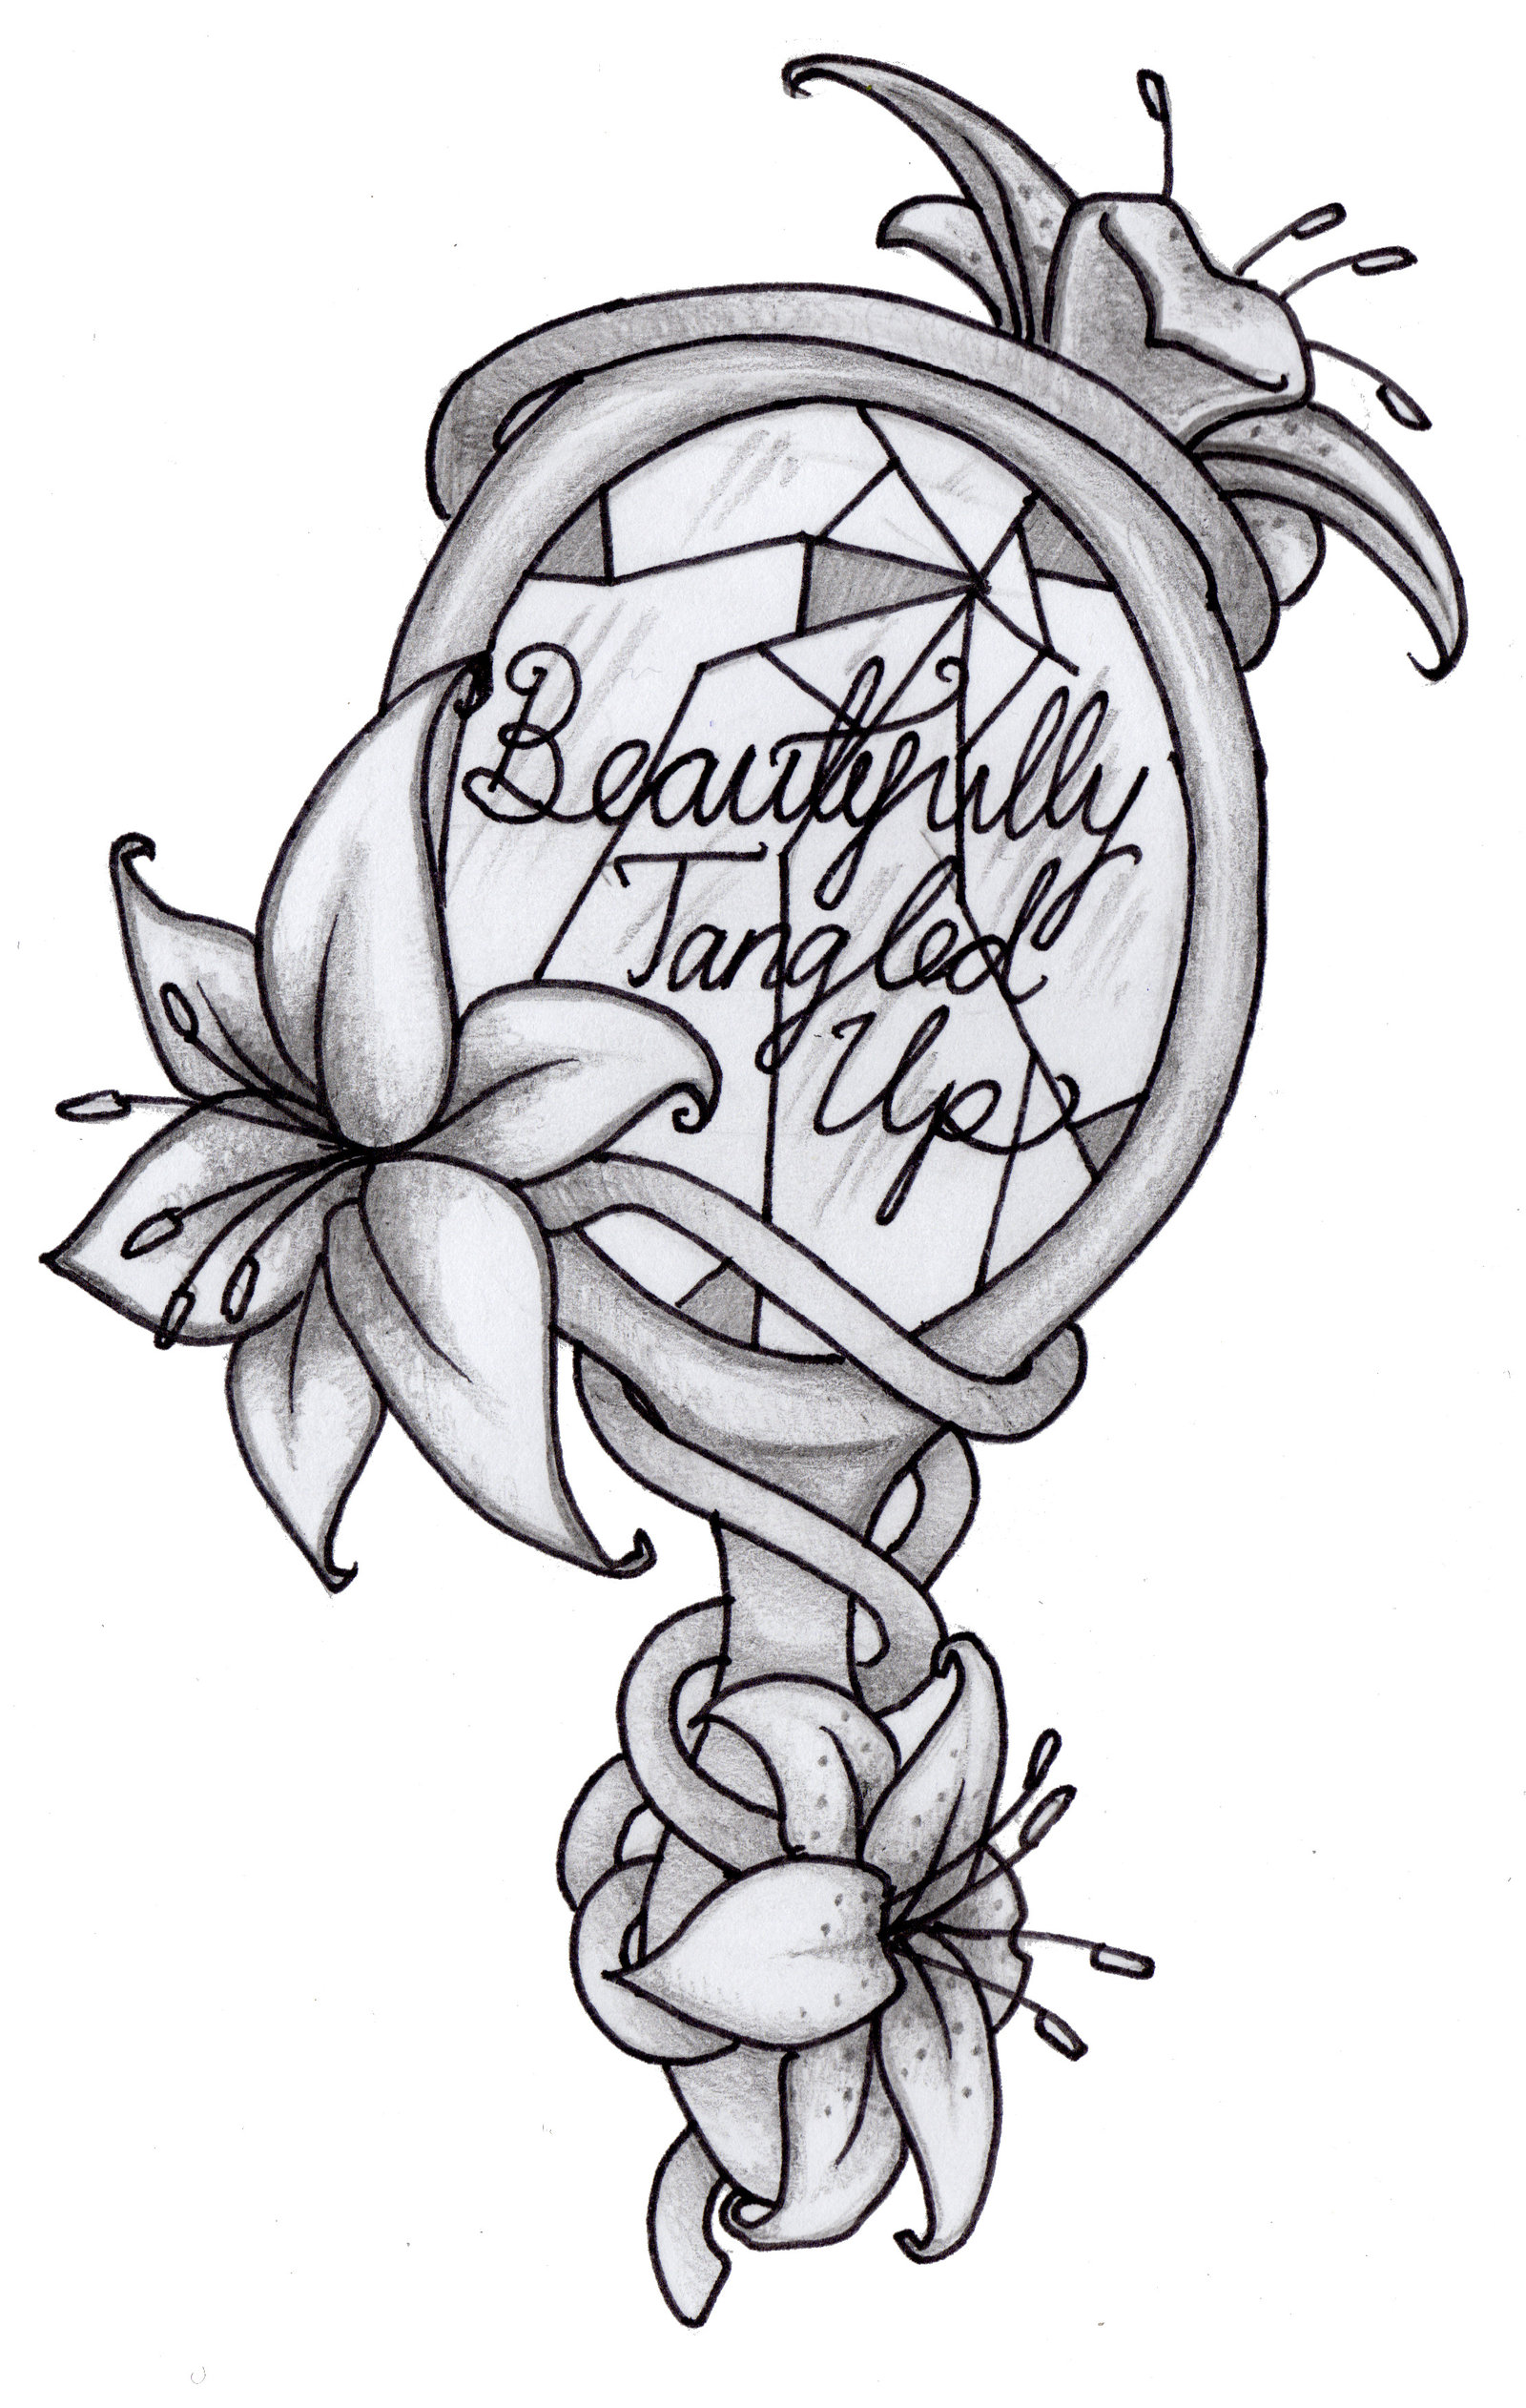 white lily drawing tattoo